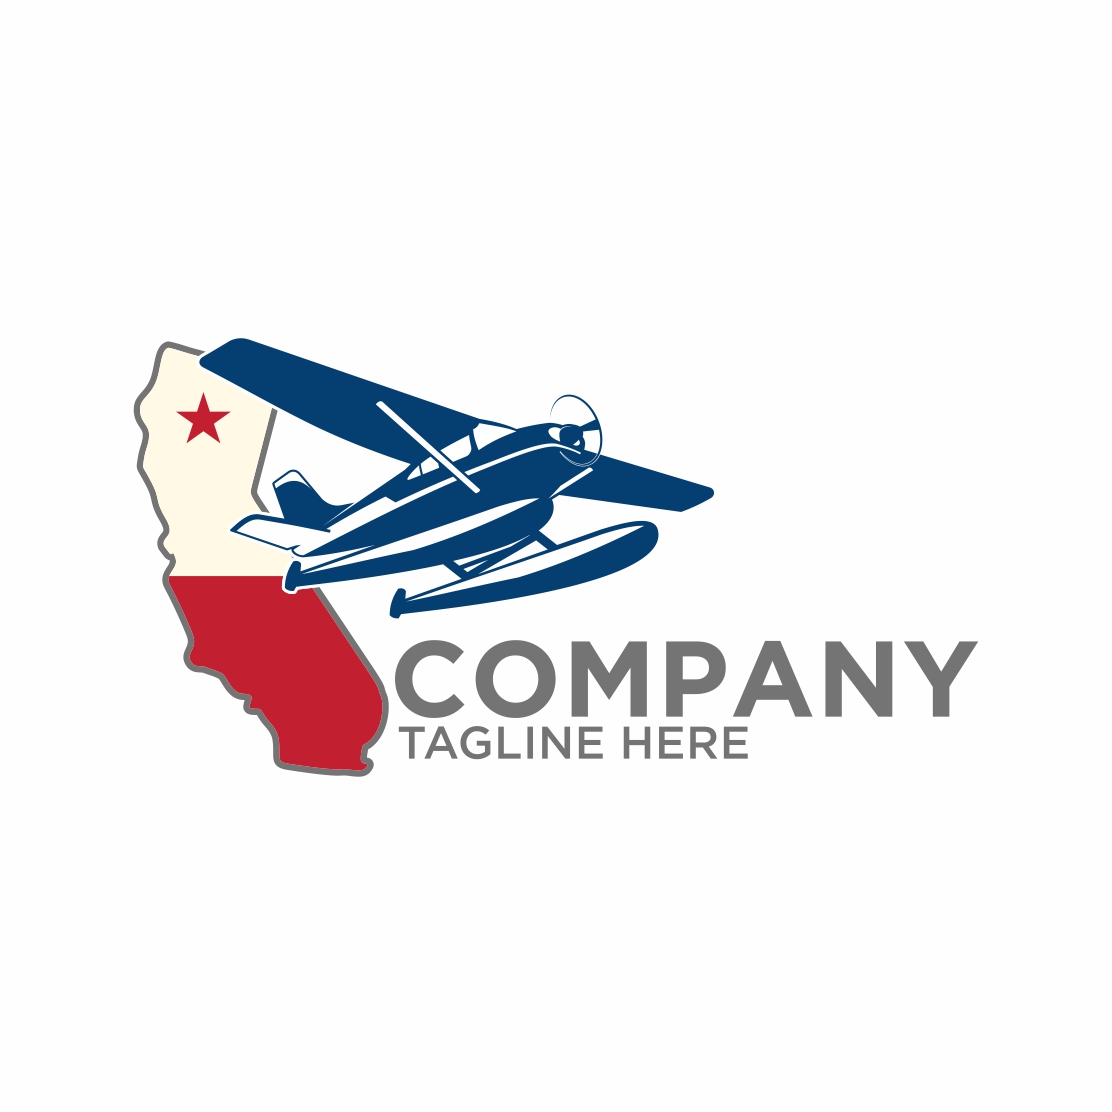 Plane logo design with flights in california - only 5$ cover image.